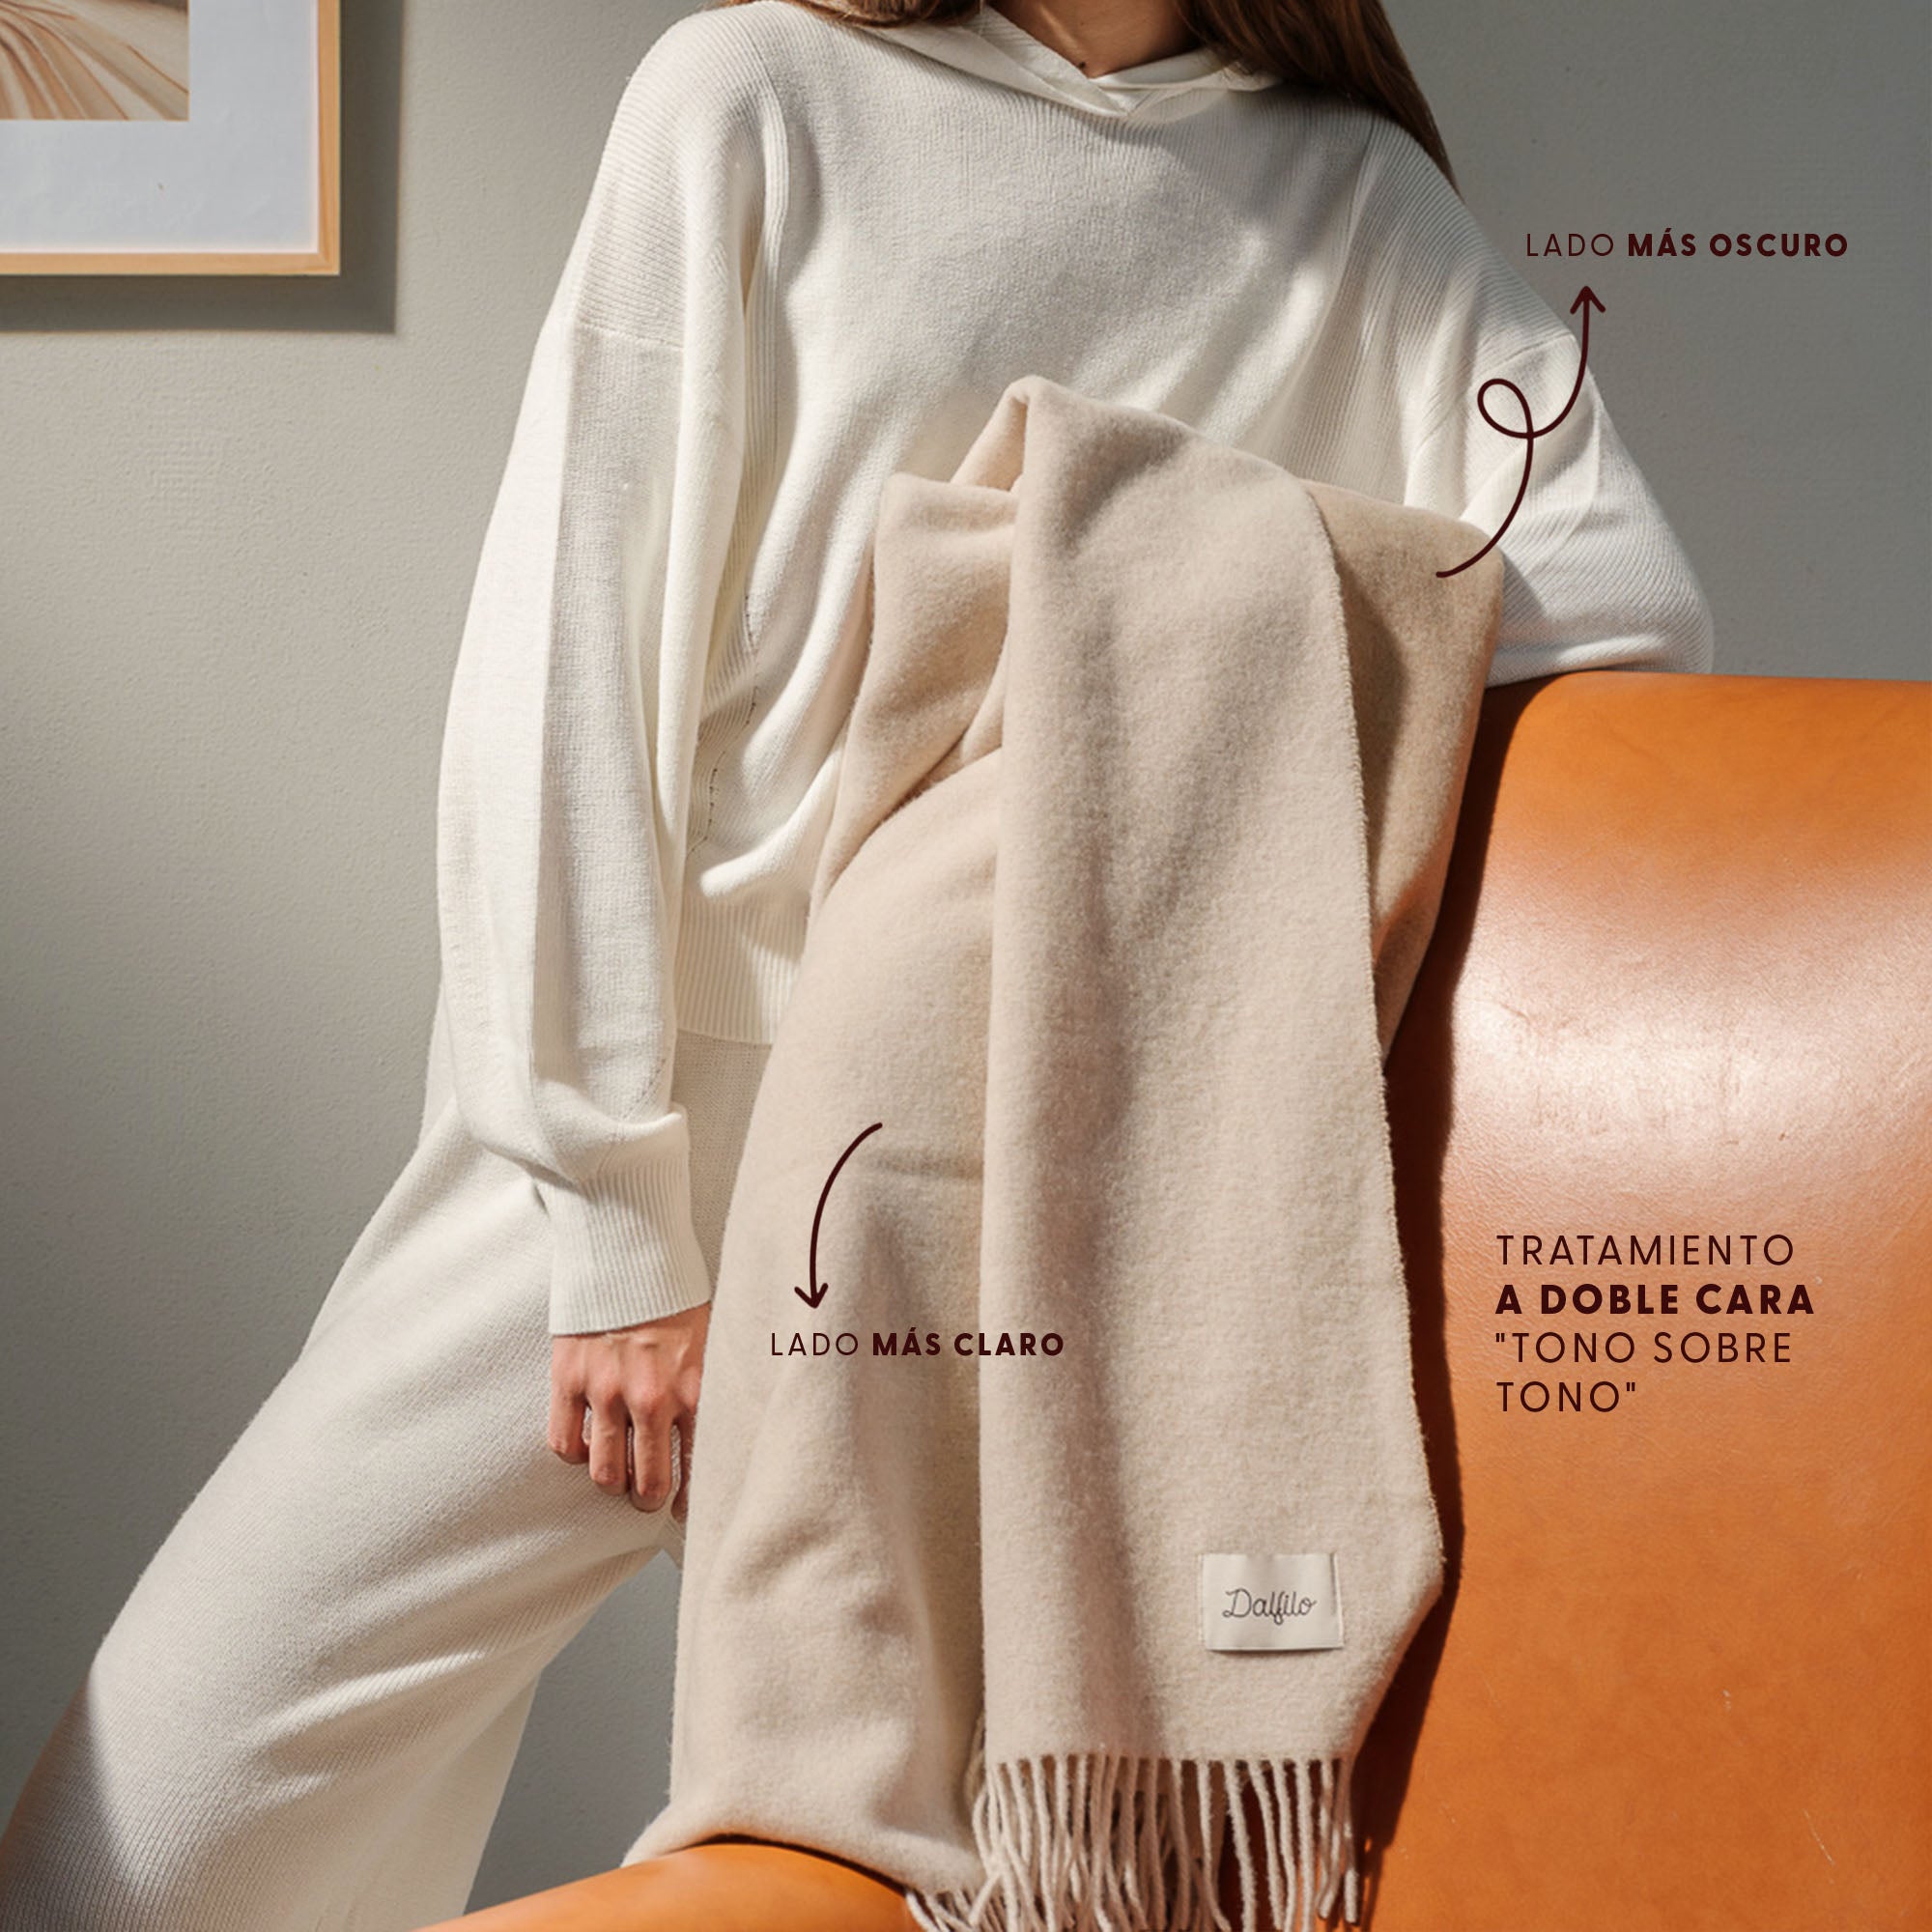 Wool and cashmere blanket